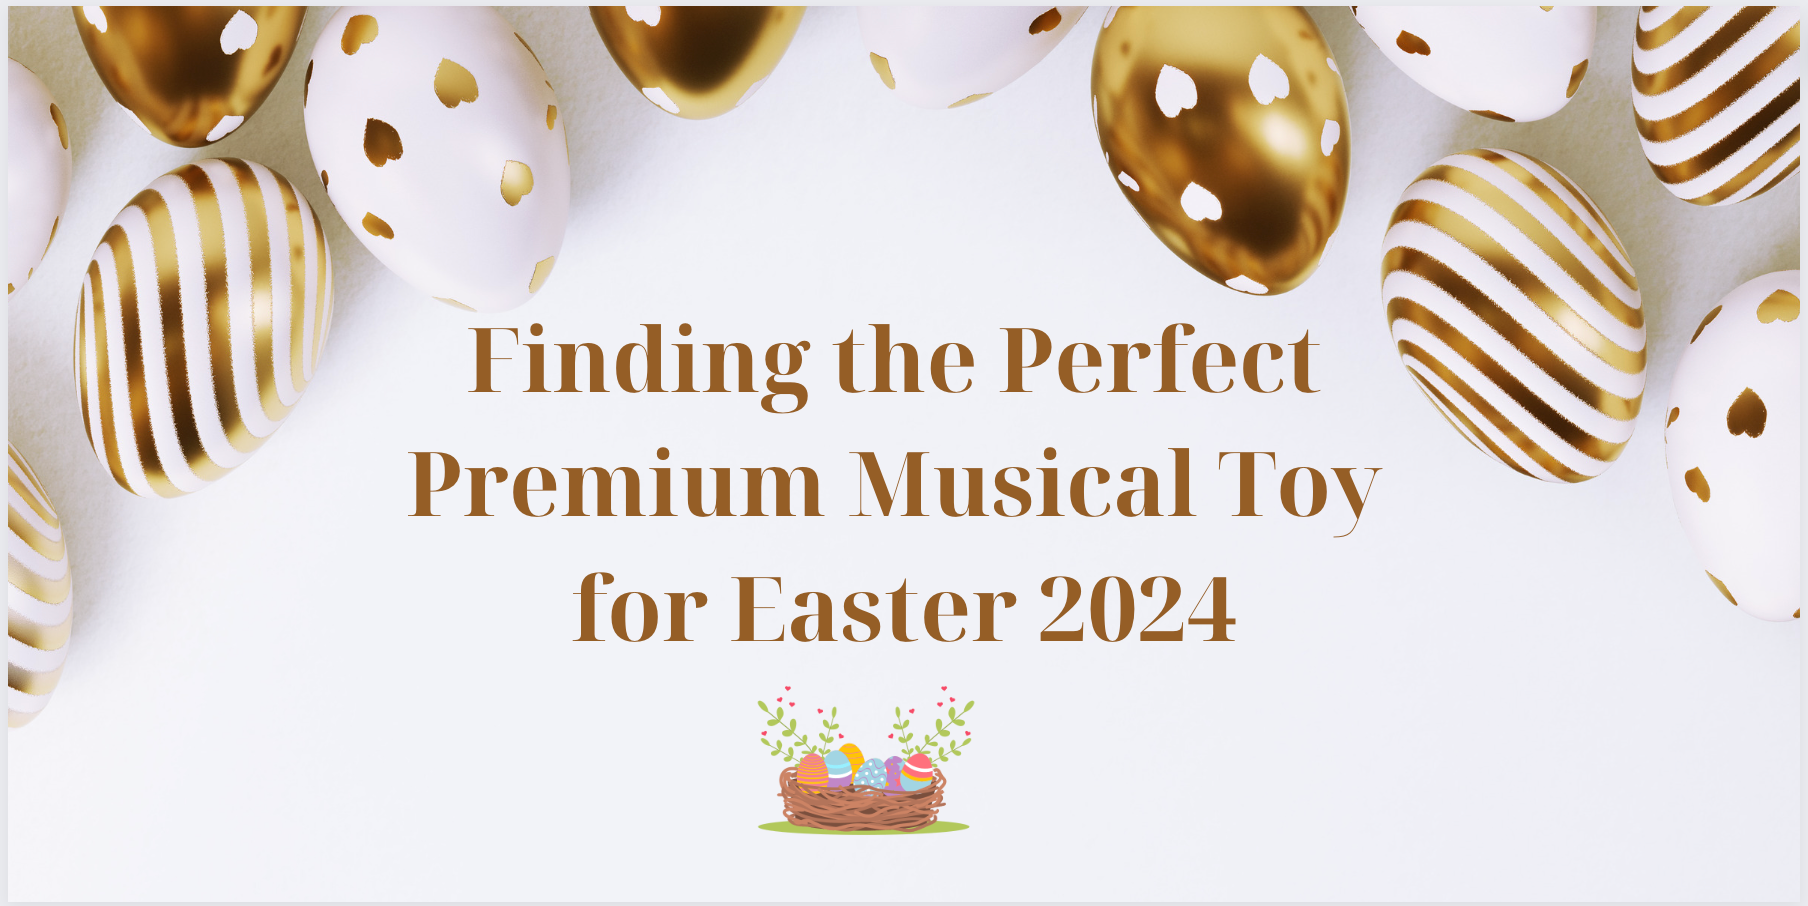 Gift Guide: Finding the Perfect Premium Musical Toy for Easter 2024